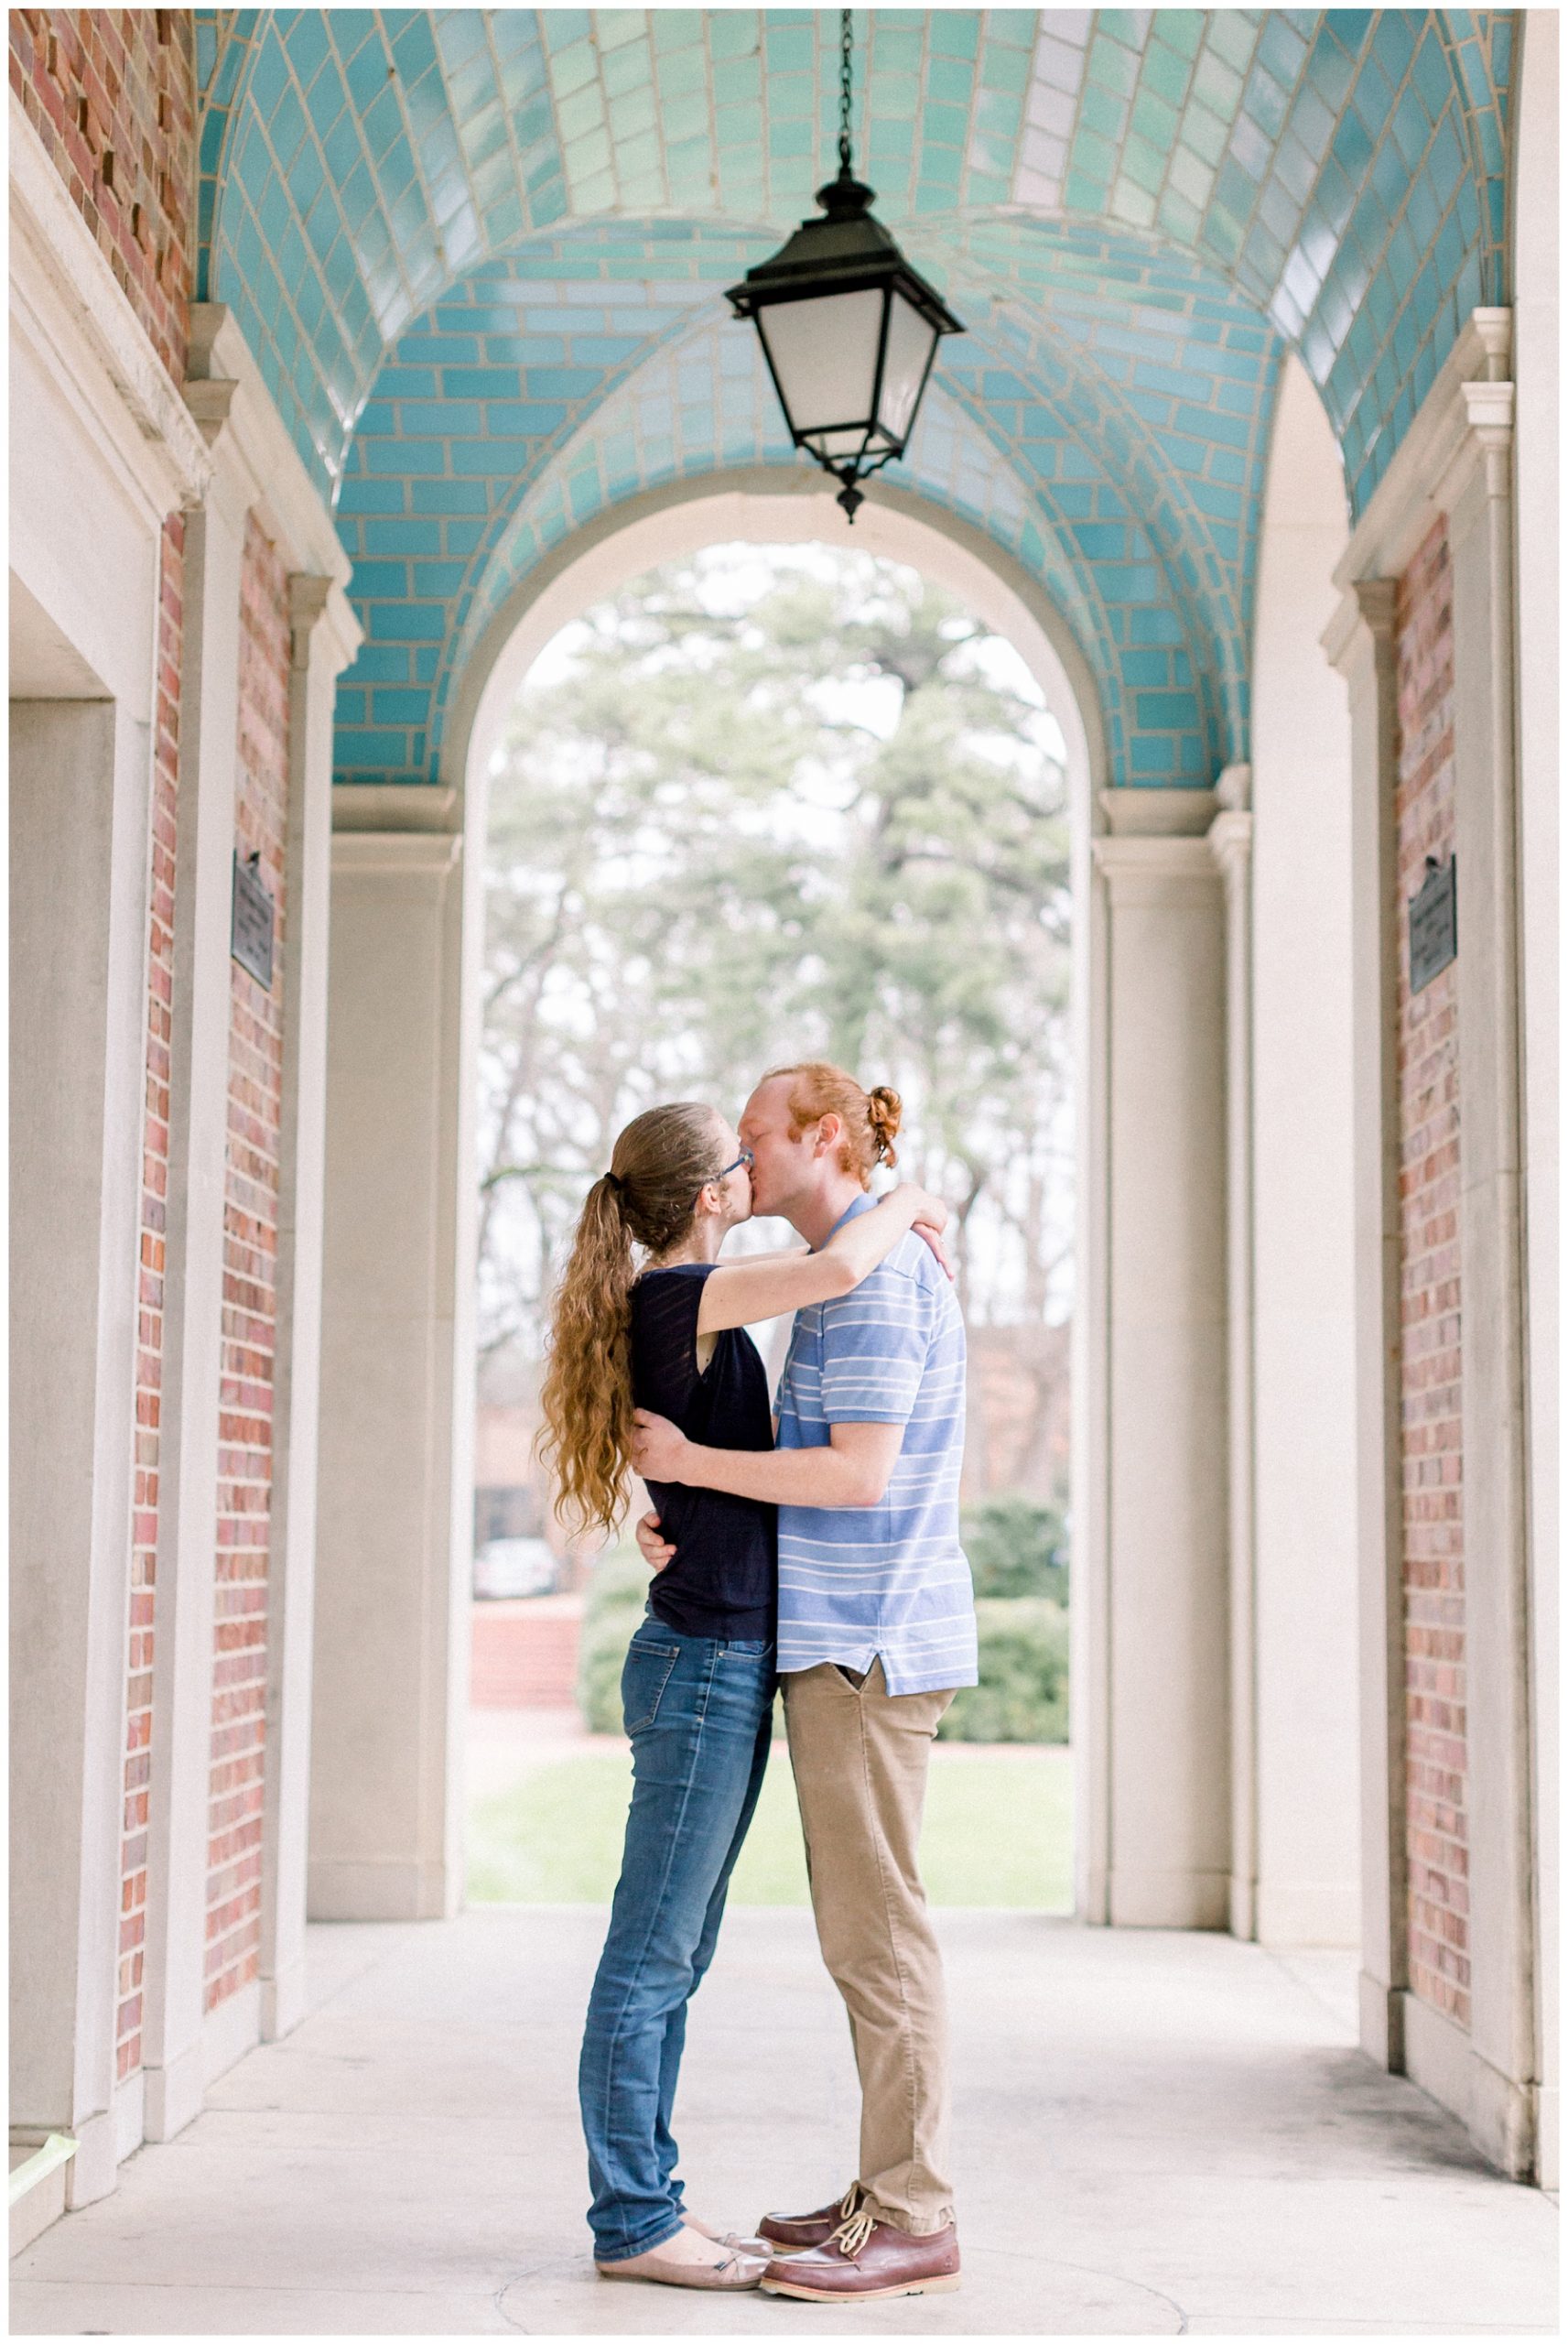 Spring Engagement Session at UNC Chapel Hill Bell Tower. North Carolina Wedding Photographer.